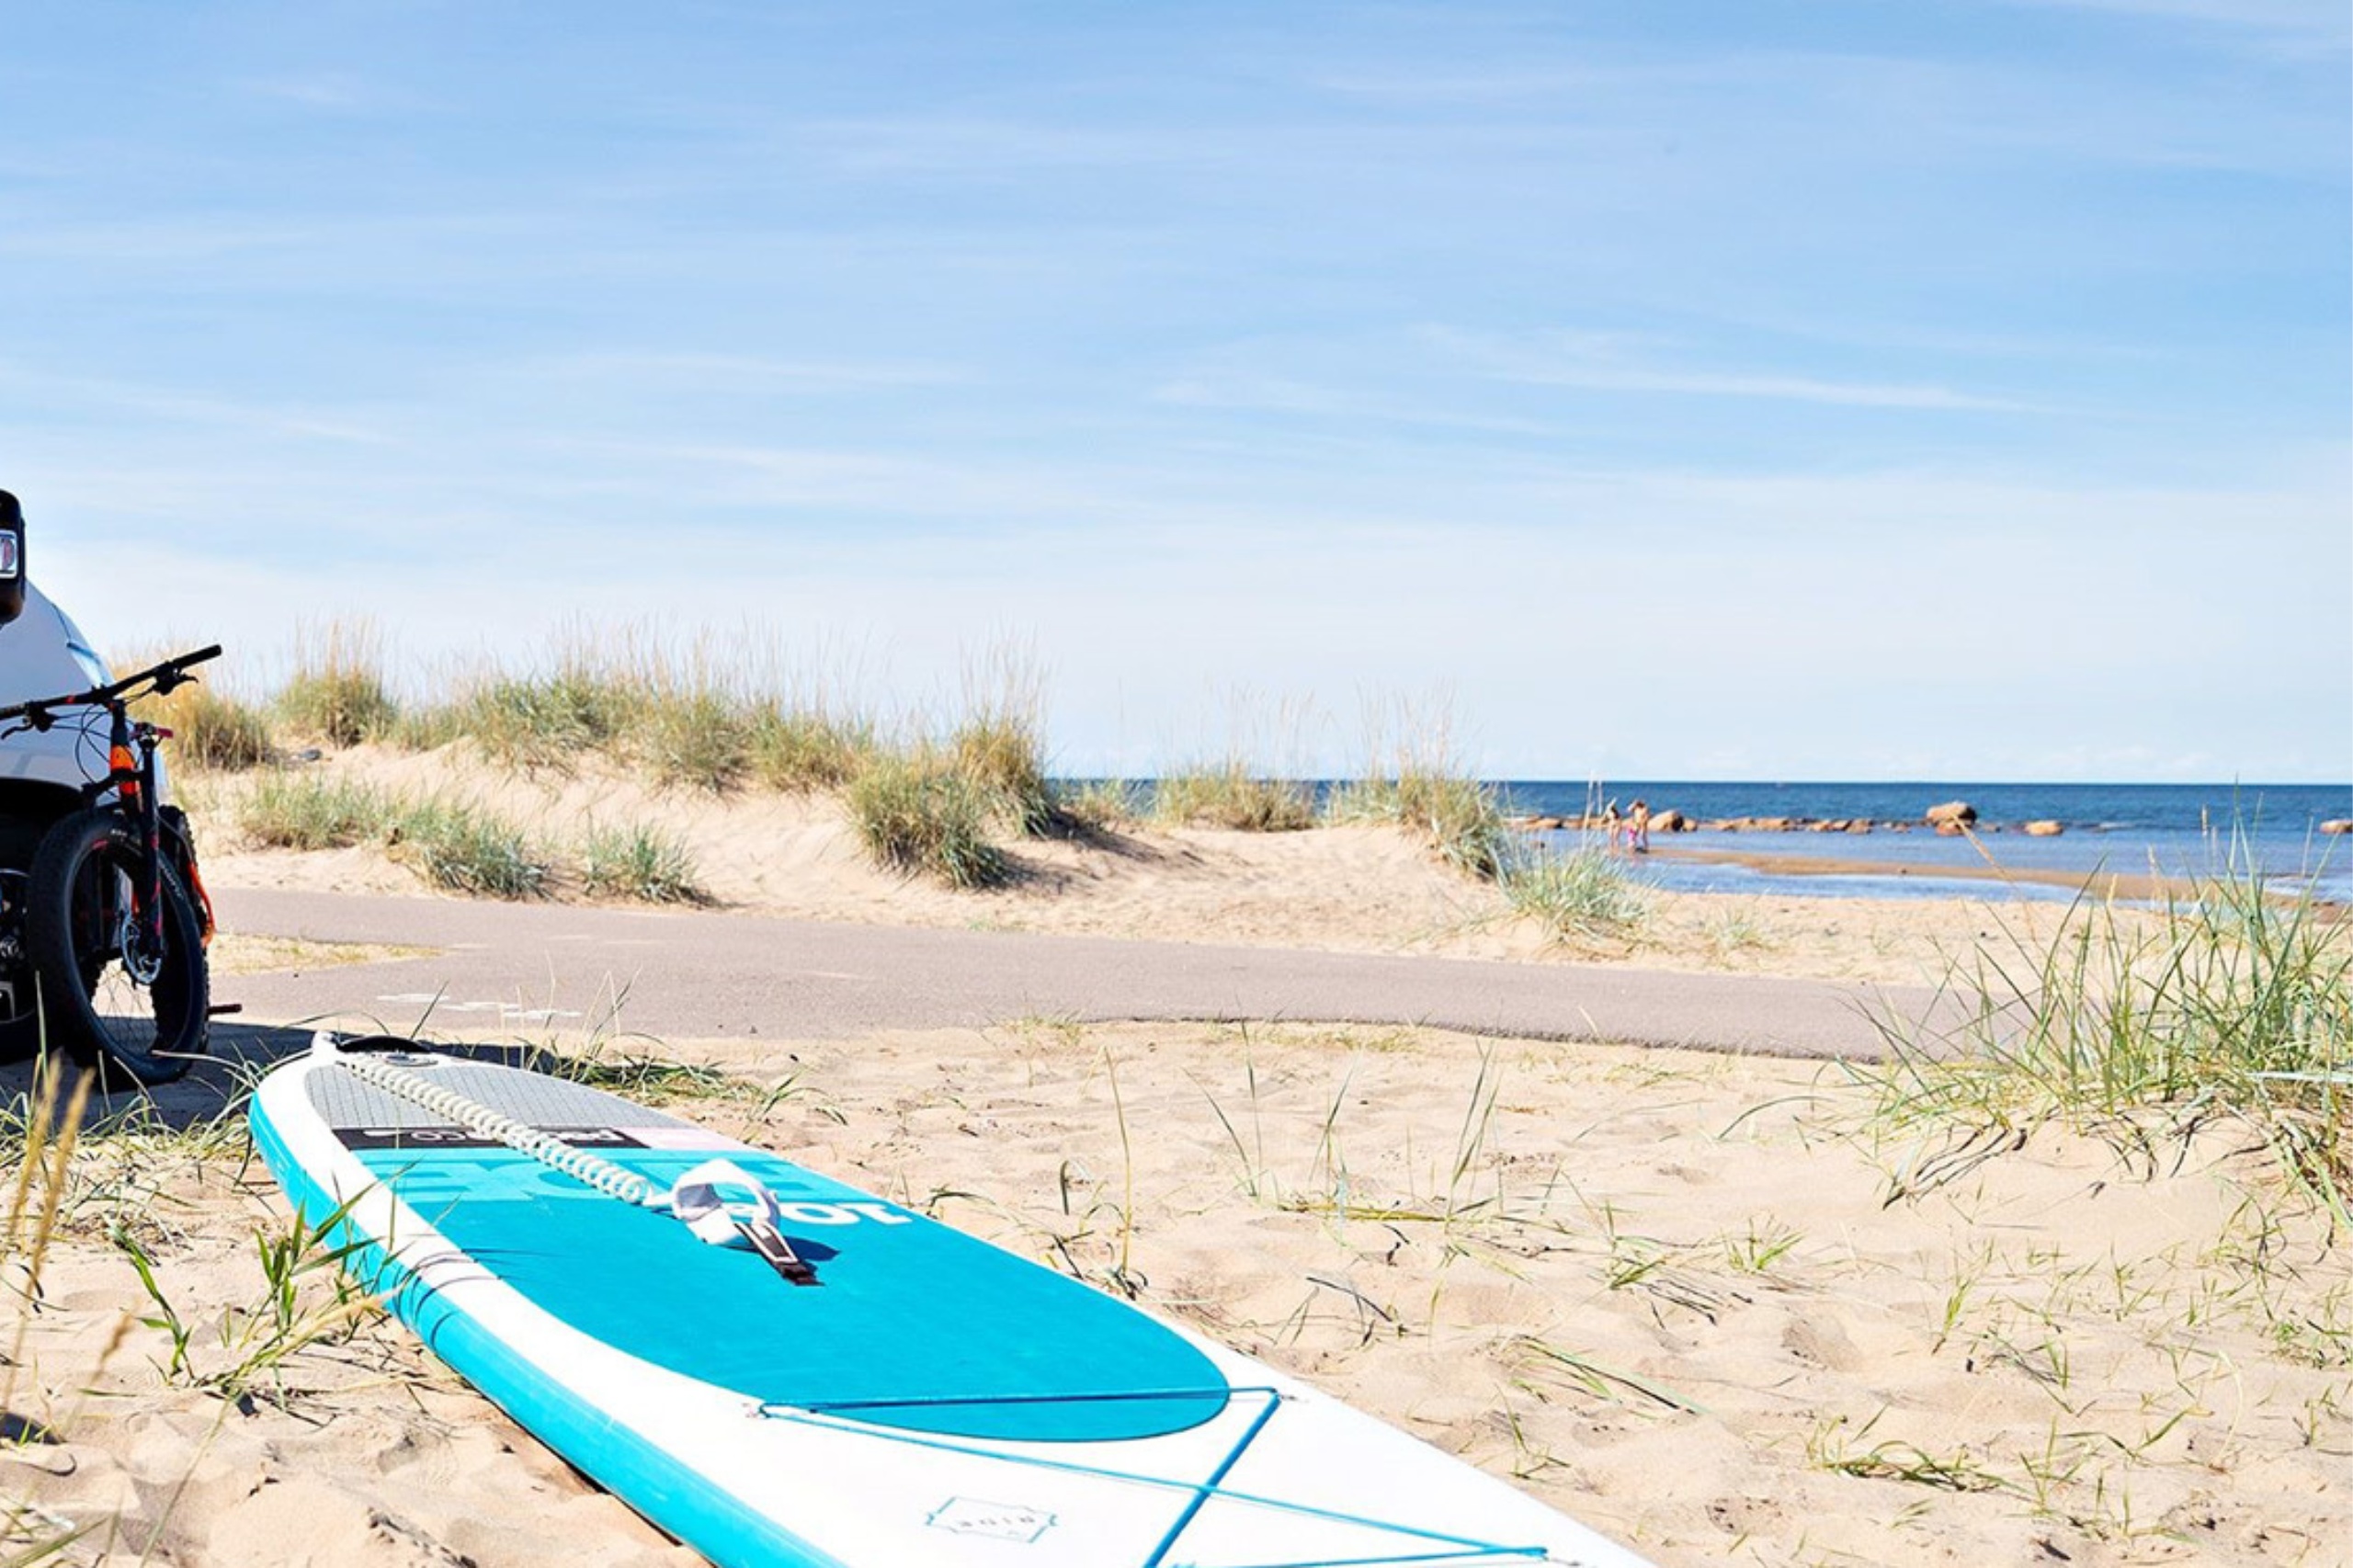  A relaxing view of the sea and being barefoot on a fine sandy beach - welcome to Kalajoki.